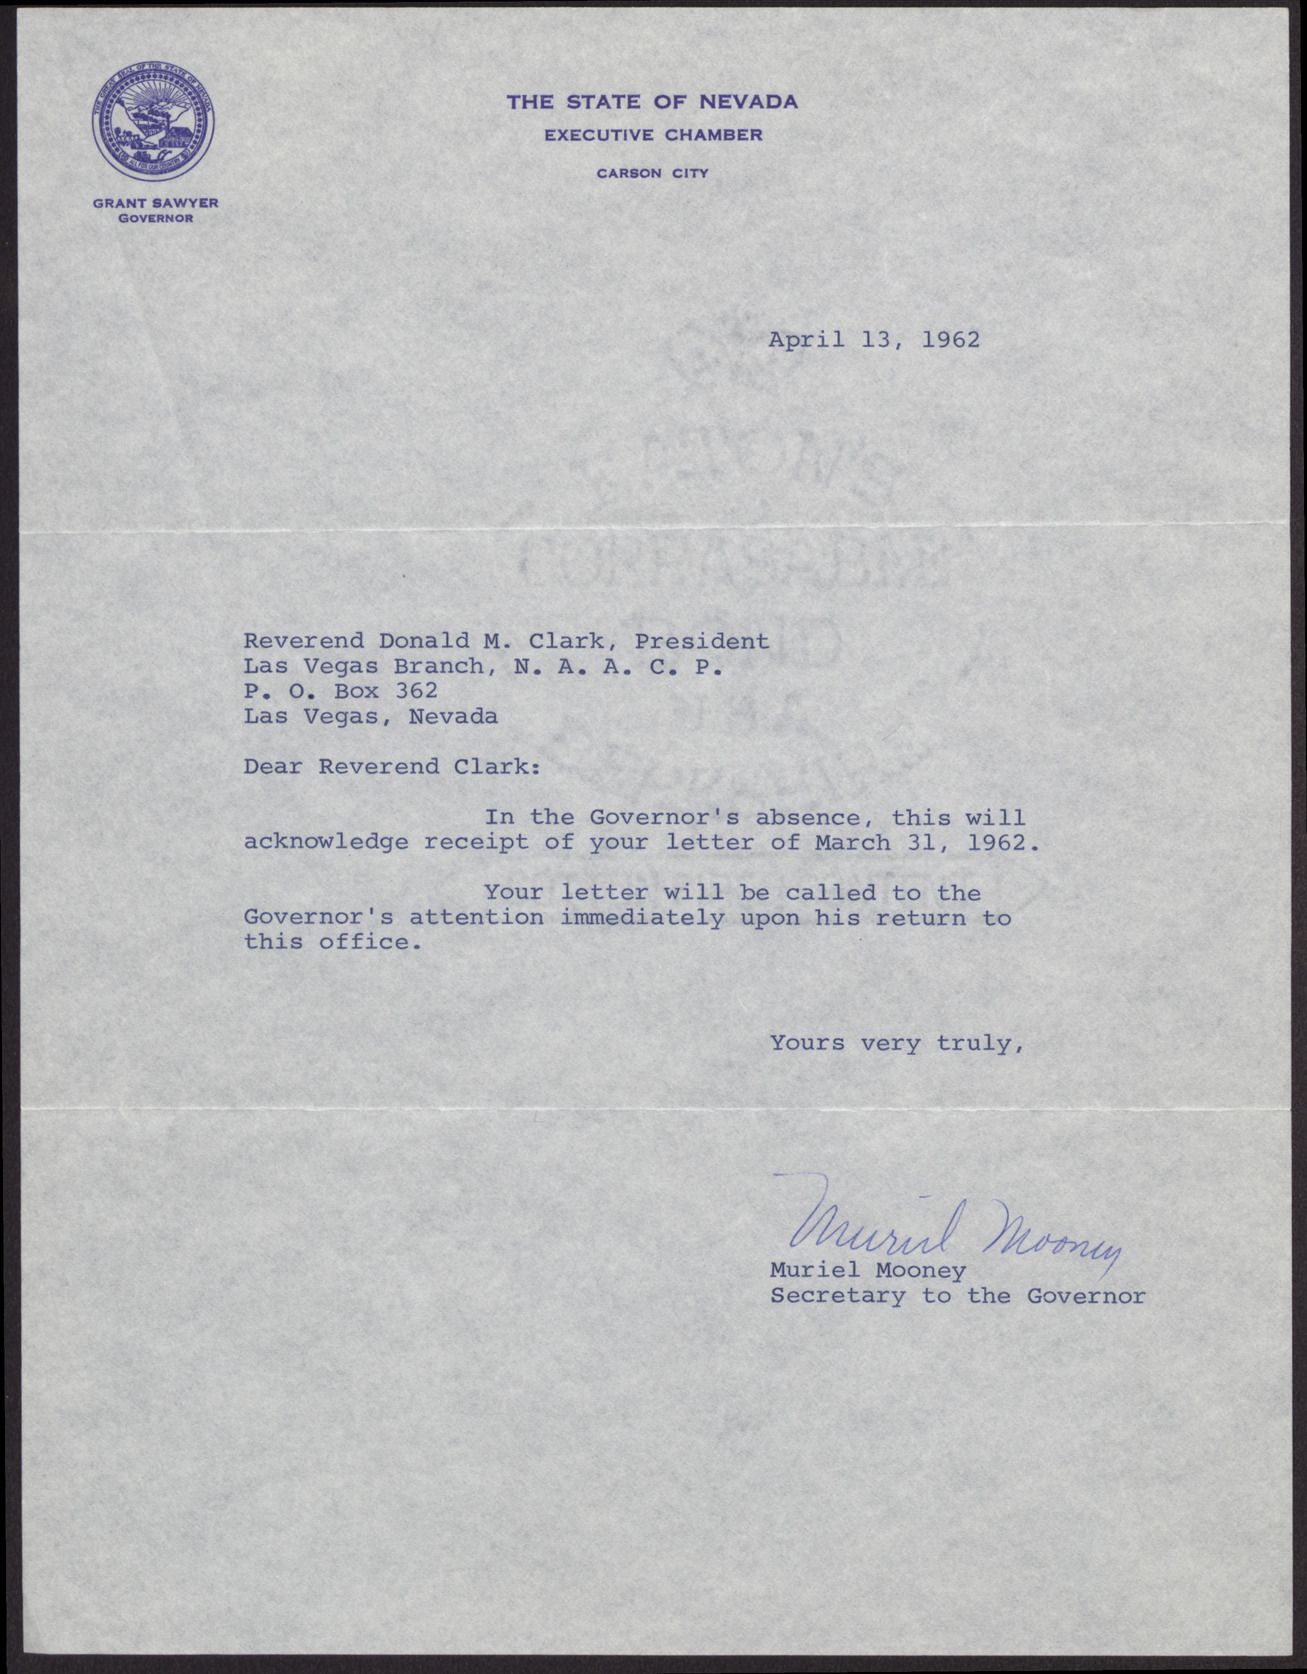 Letter to Reverend Donald M. Clark from Muriel Mooney, April 13, 1962